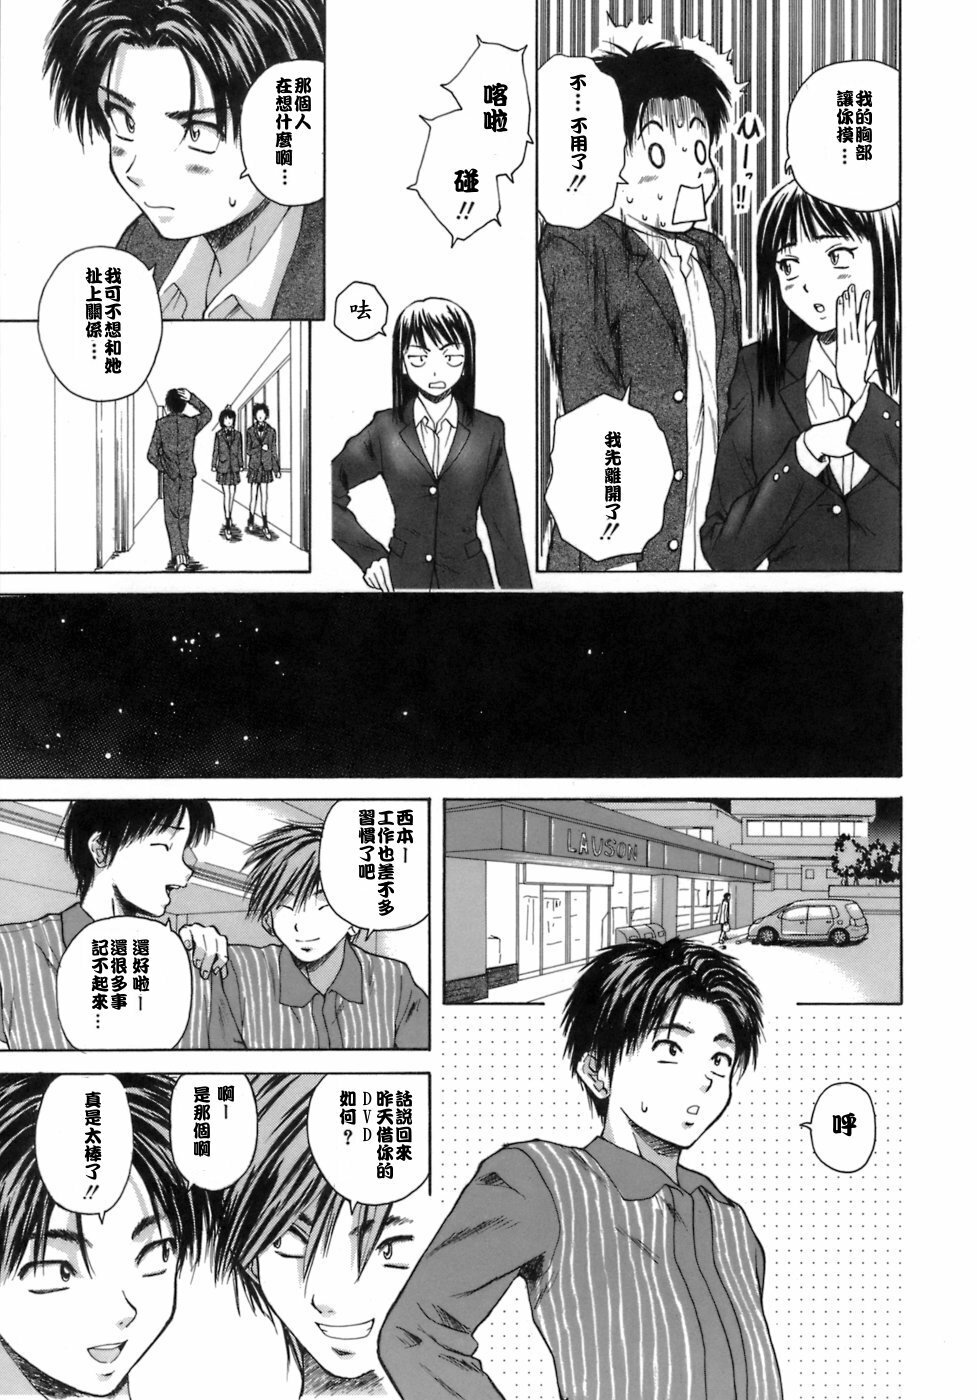 [Fuuga] Kyoushi to Seito to - Teacher and Student [Chinese] [悠月工房] page 8 full